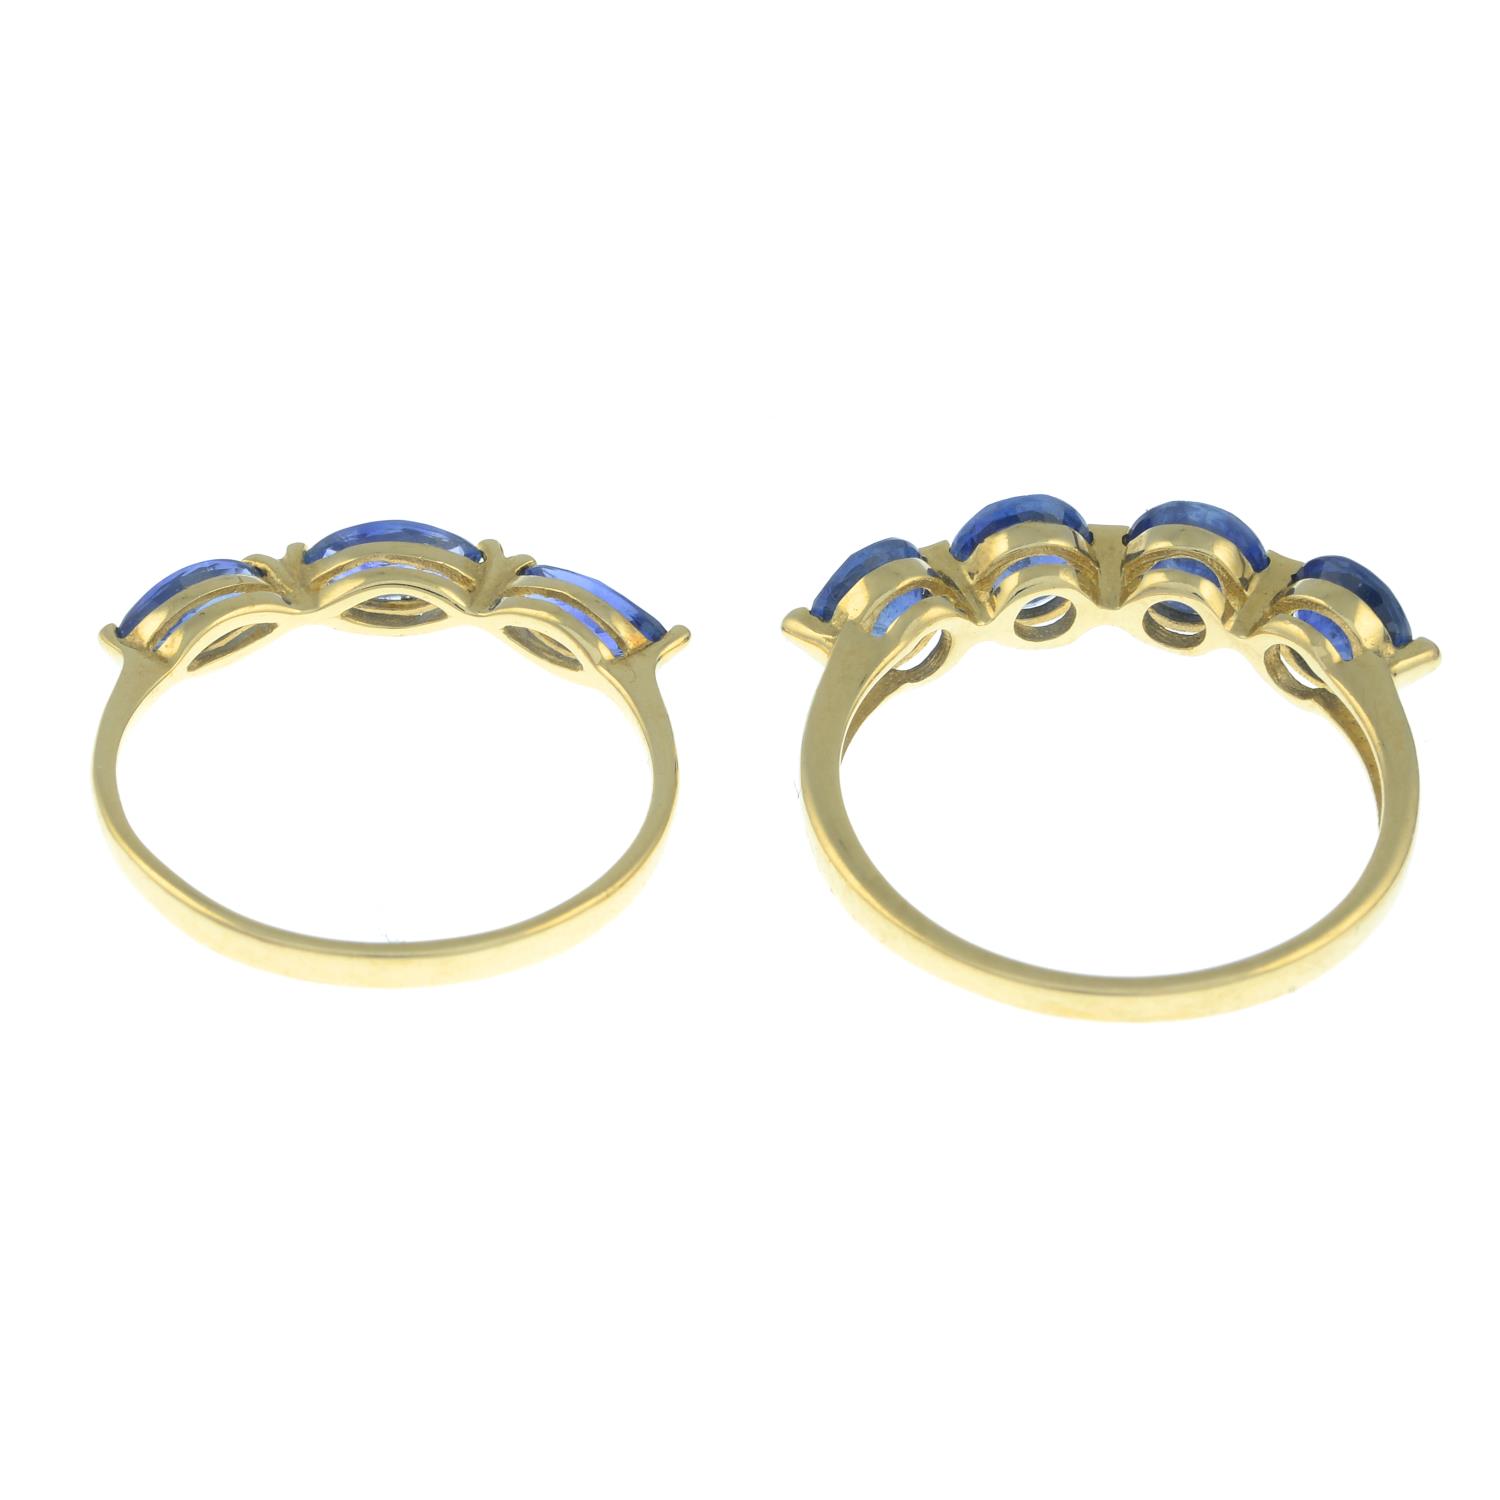 Two 9ct gold sapphire rings.Hallmarks for 9ct gold. - Image 2 of 3